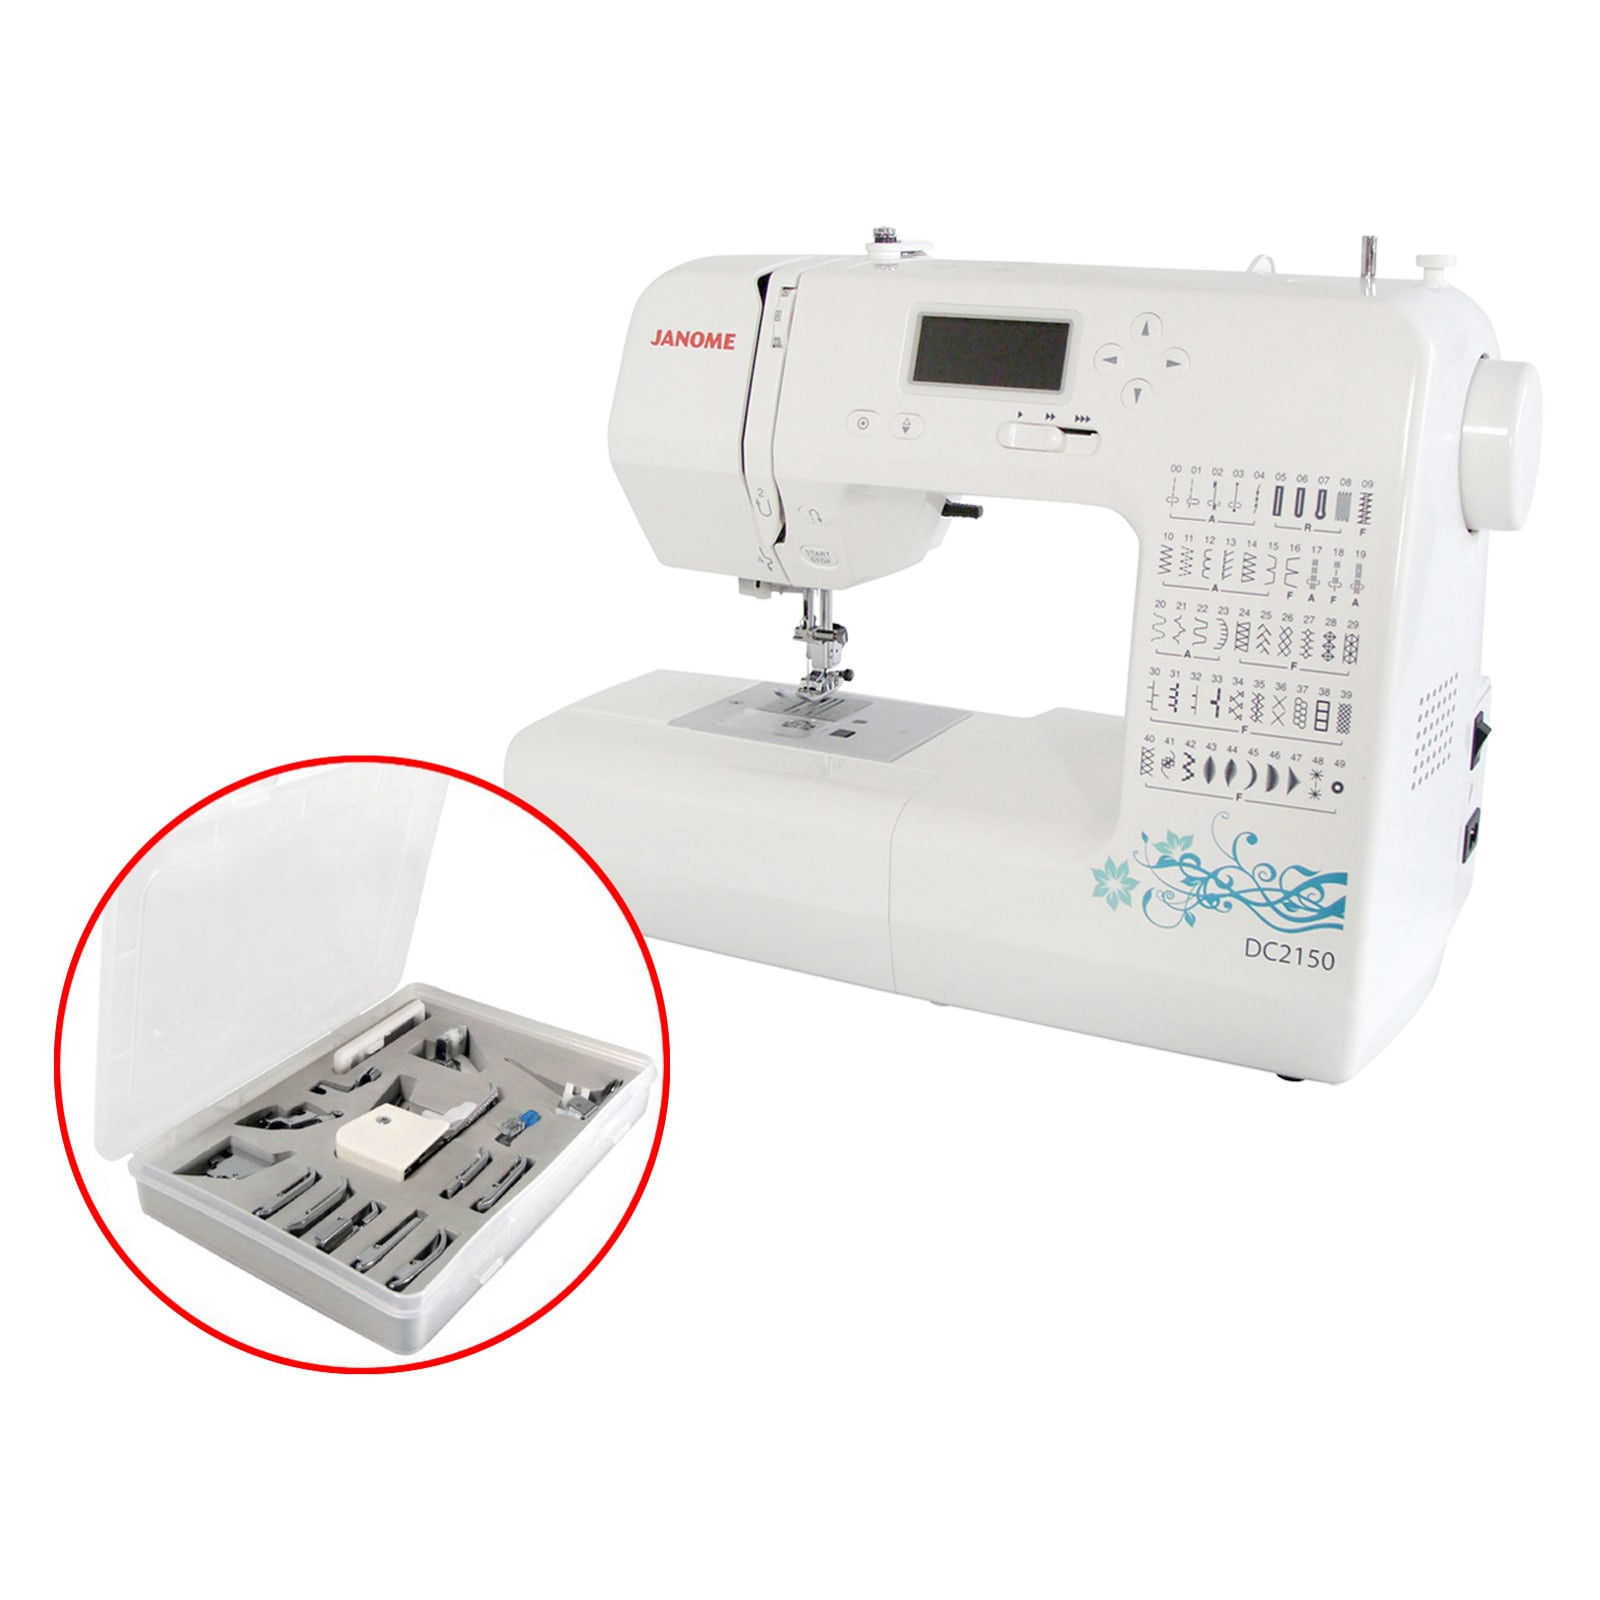 Janome DC2150 Sewing Machine with Walking Foot Feet Set Sew Much Easier